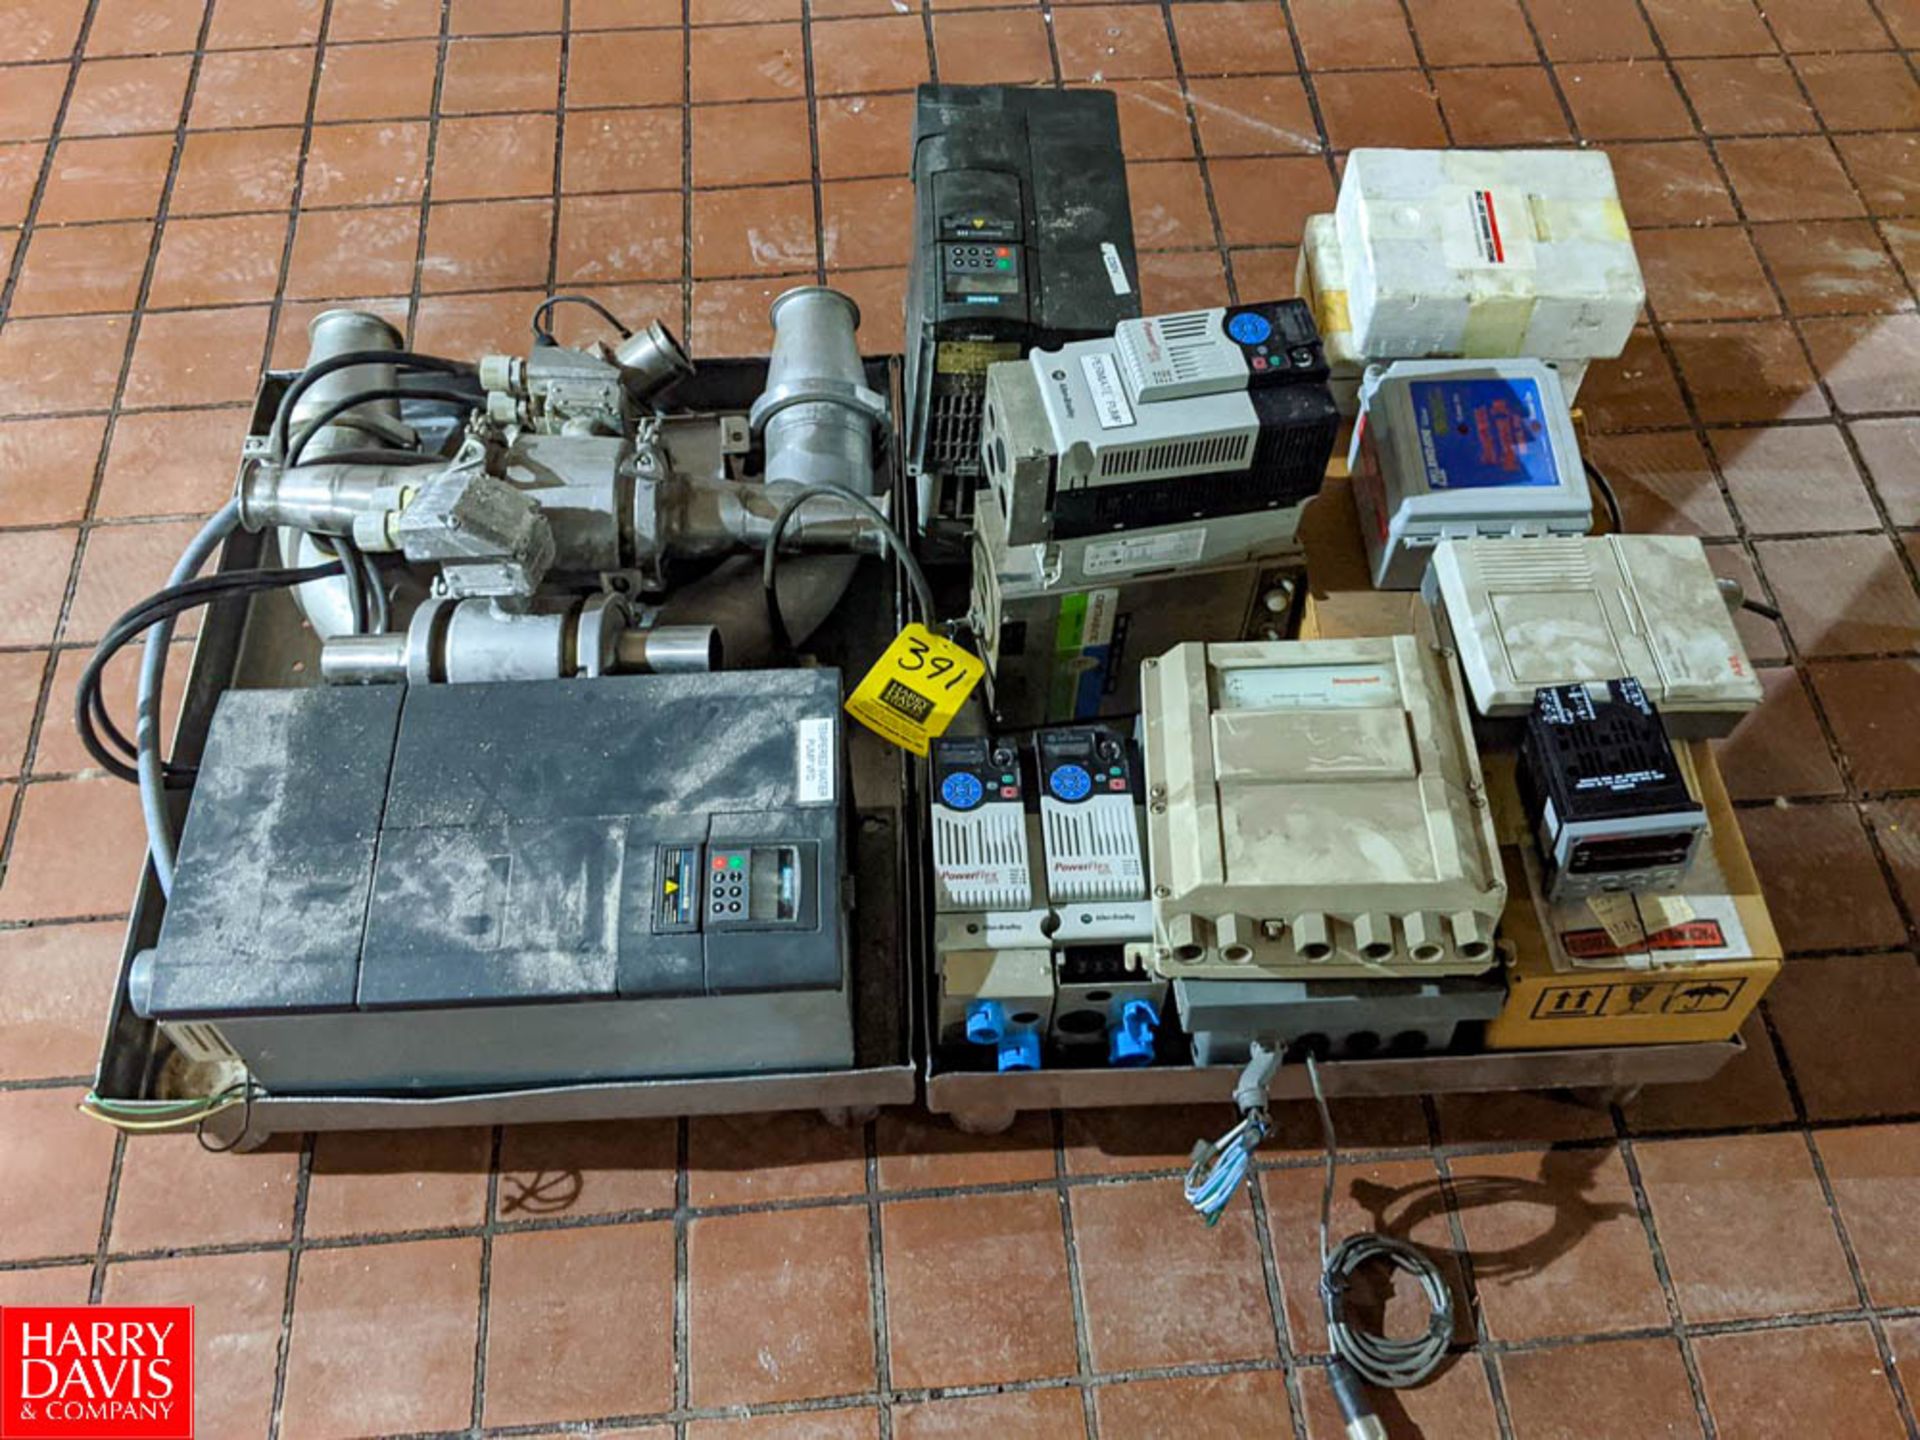 Pallet of Assorted Electrical Equipment (1) Siemens Micromaster 440 Variable Frequency Drive, (1)